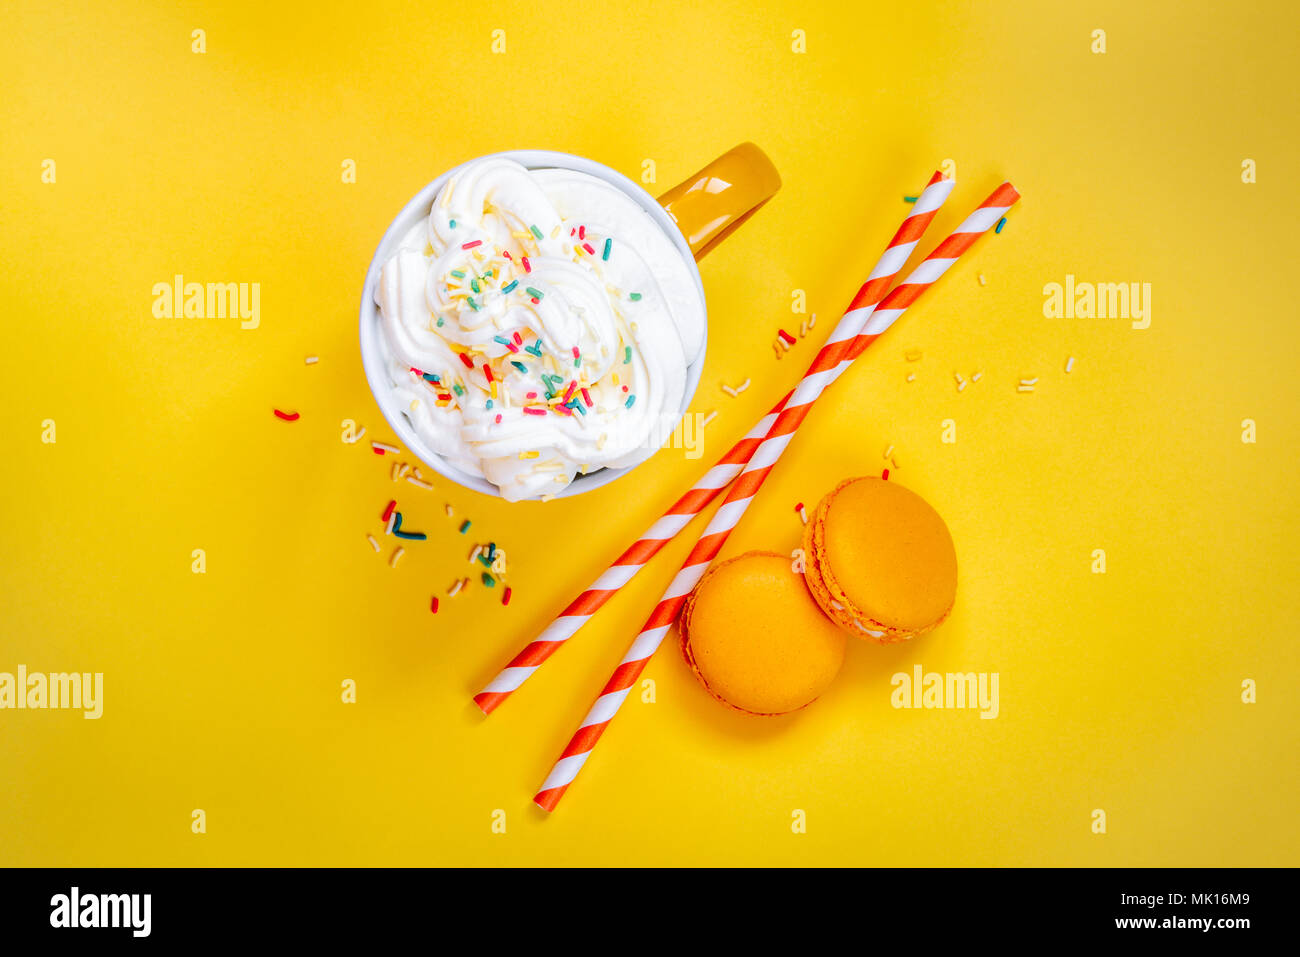 Top view of yellow coffee cup, straws and french macaroons over yellow background. Stock Photo